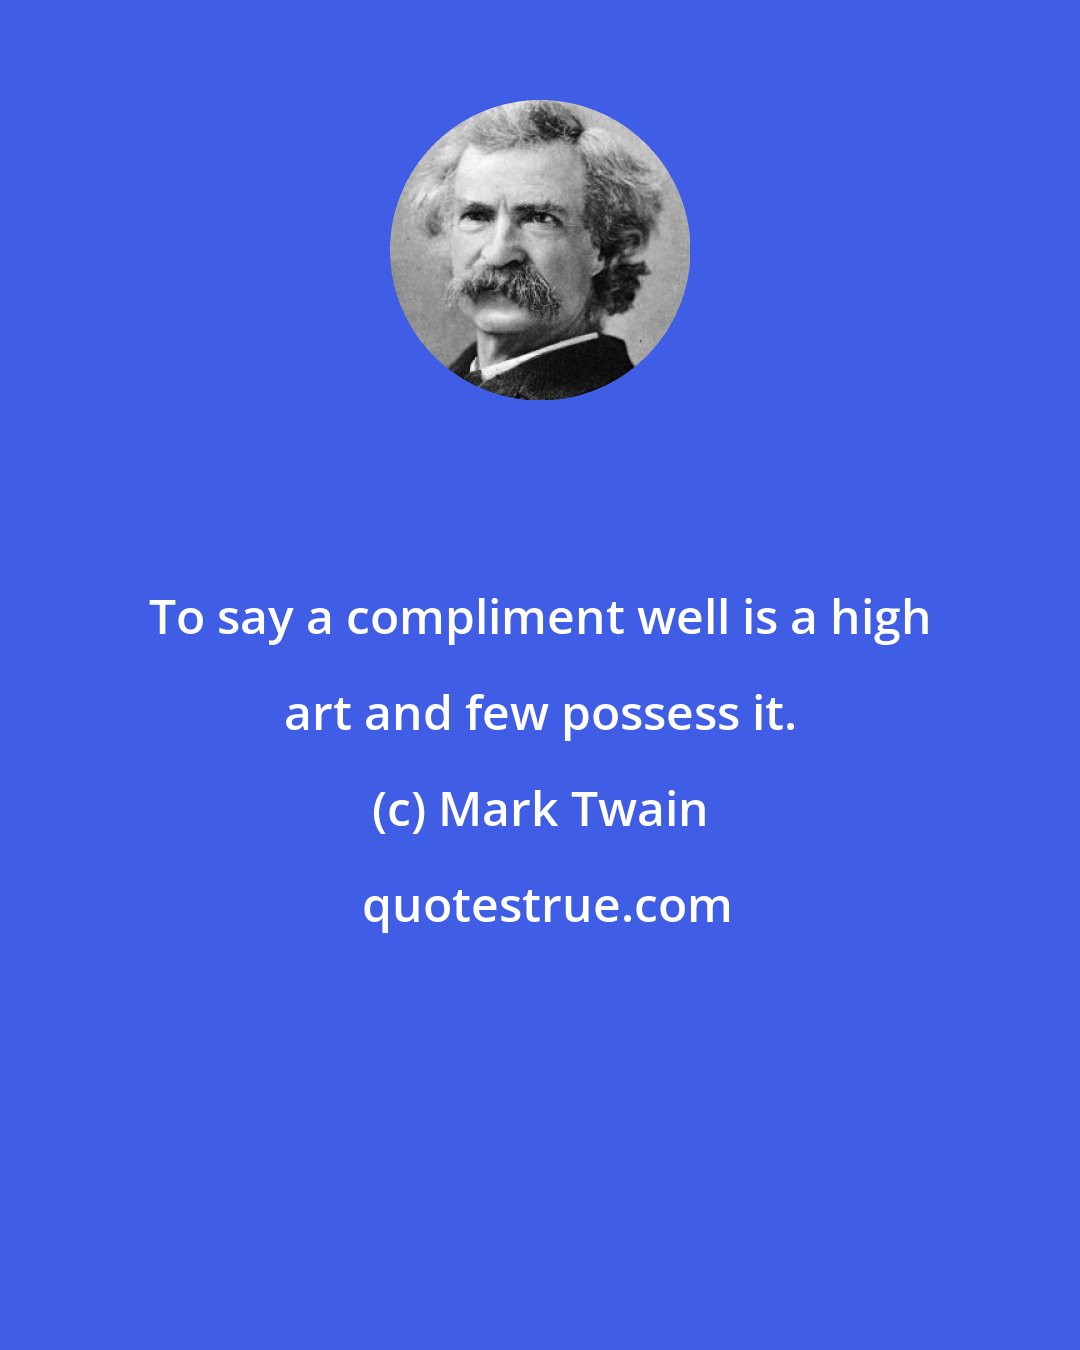 Mark Twain: To say a compliment well is a high art and few possess it.